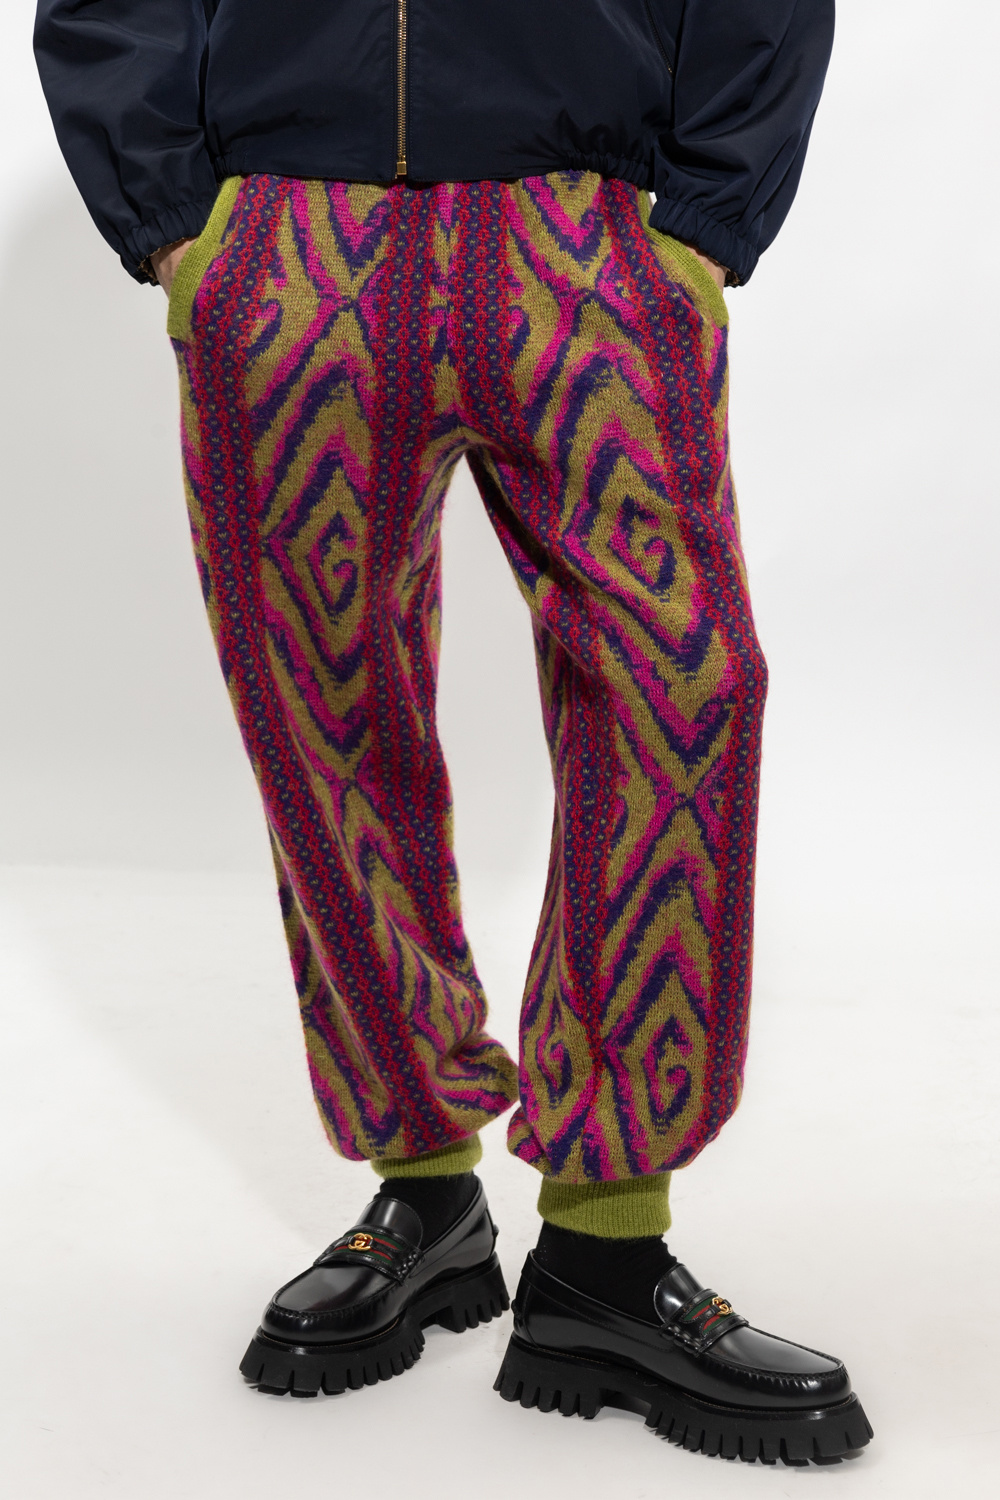 Gucci Patterned Leather trousers